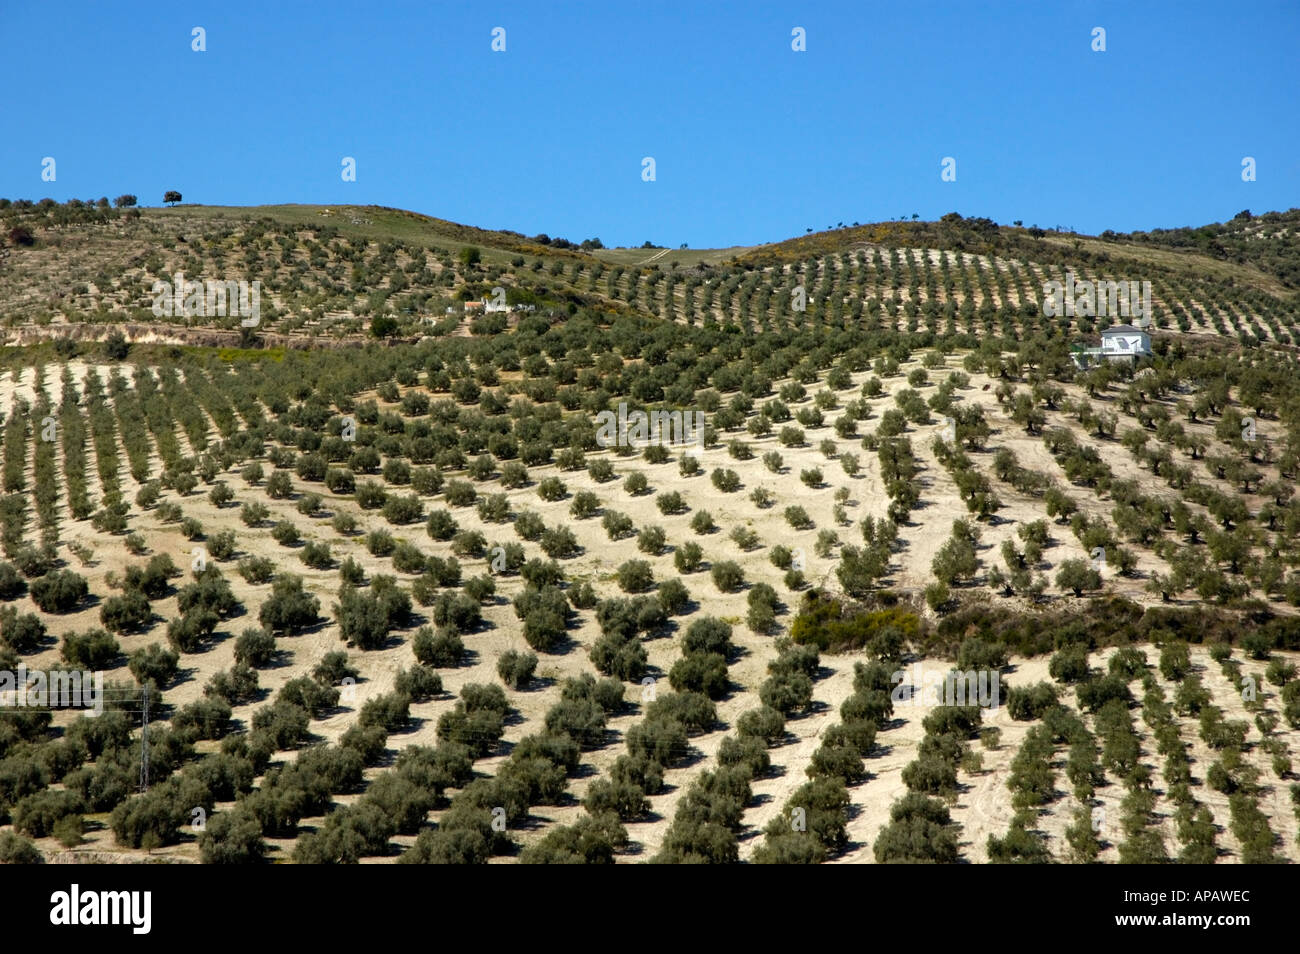 Andalucia countryside - Rows of olive trees growing near the village of Baena, Andalucia, Spain. Stock Photo